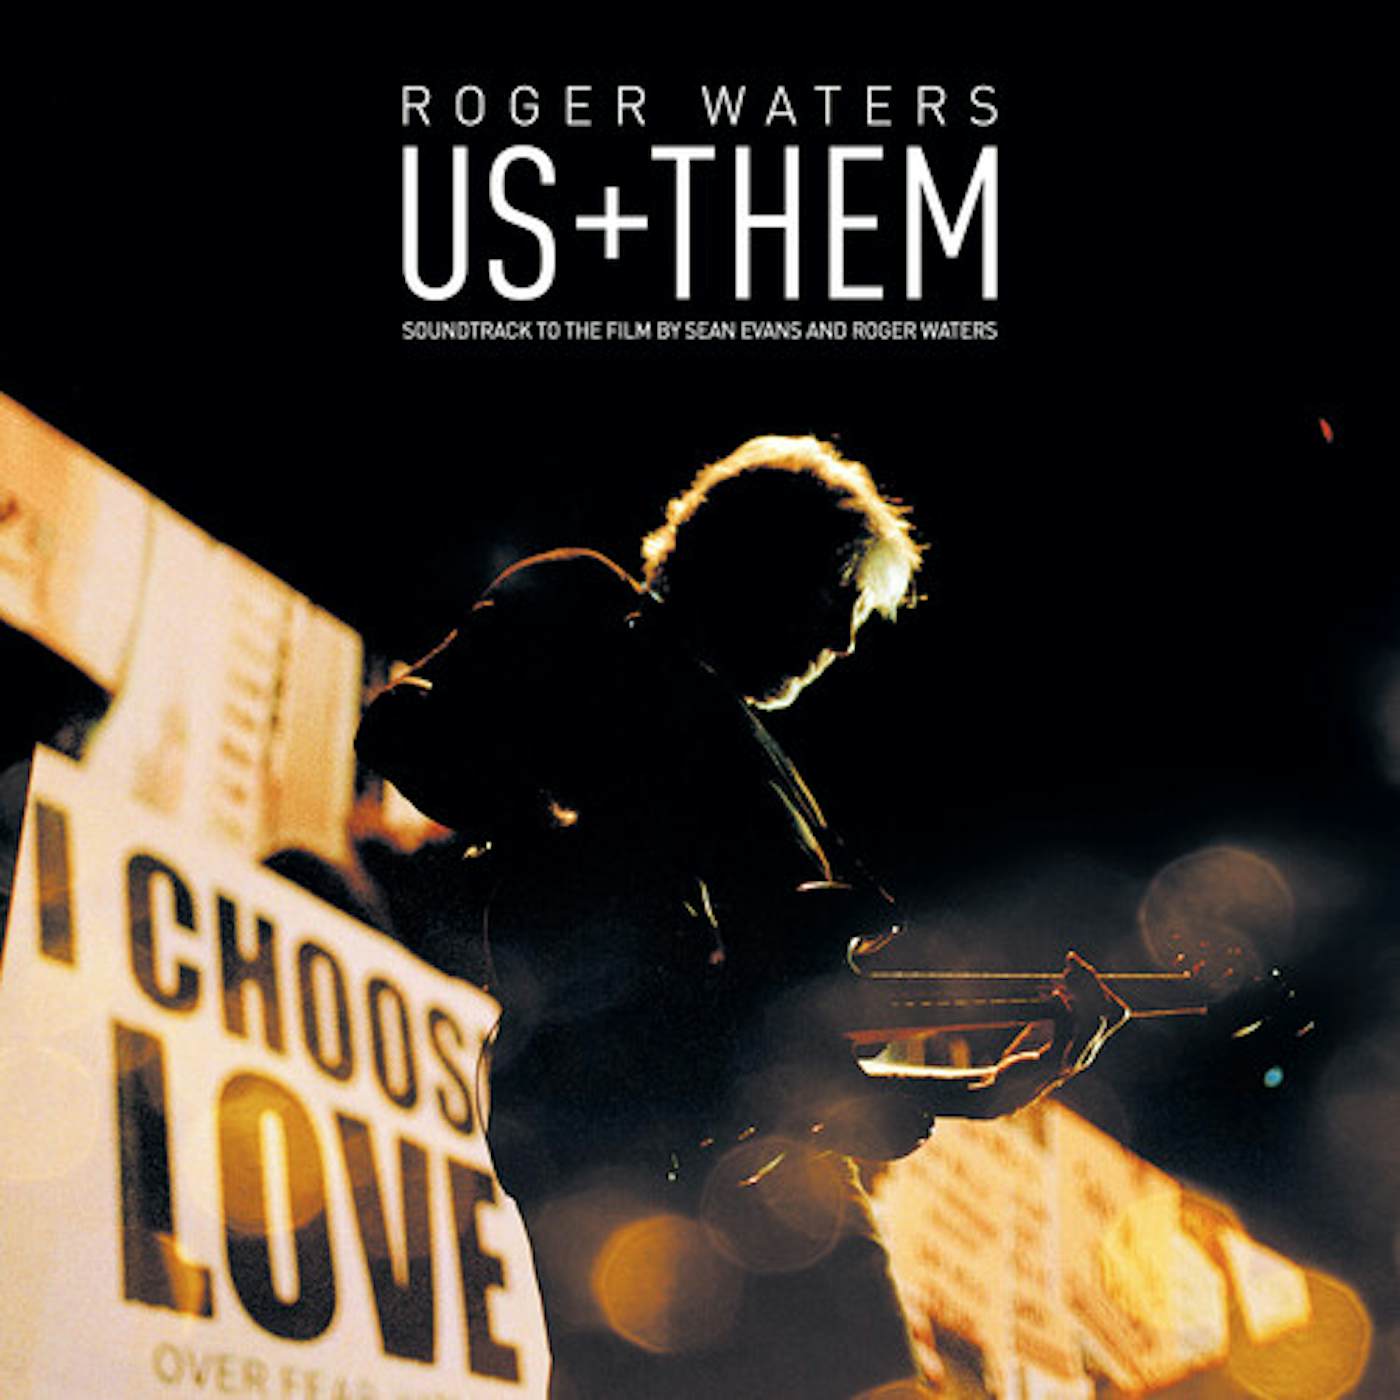 Roger Waters US + THEM Blu-ray